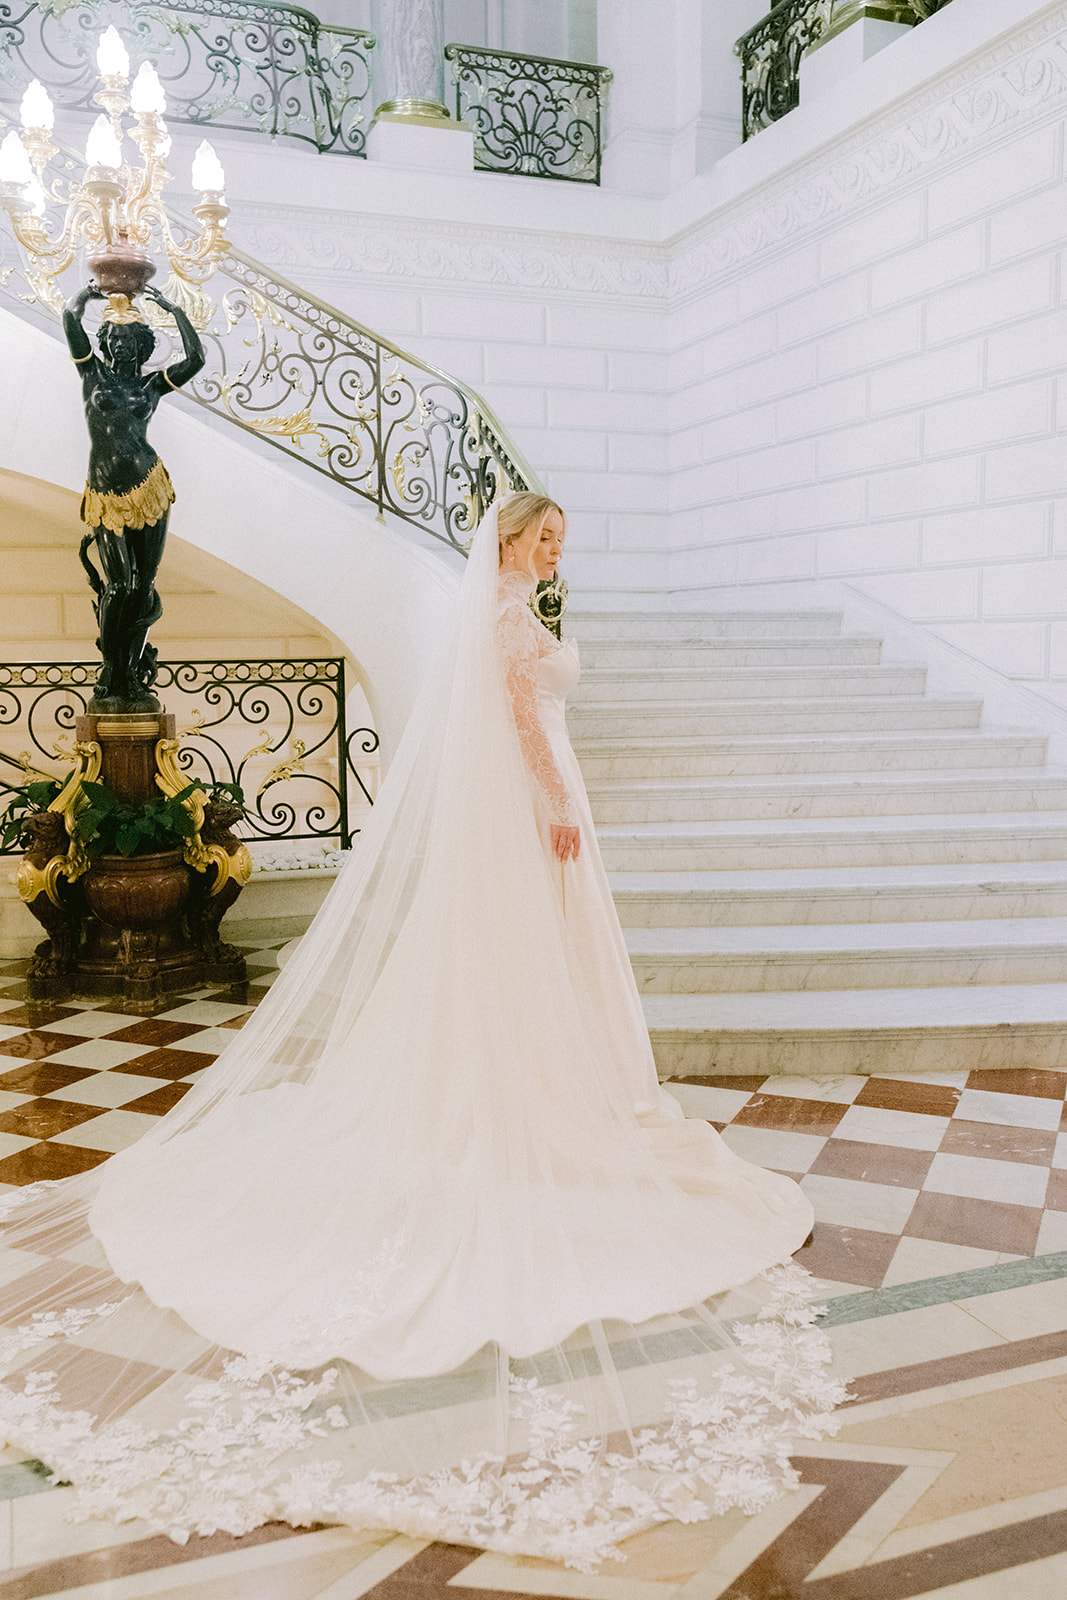 The bride poses in front of the steps